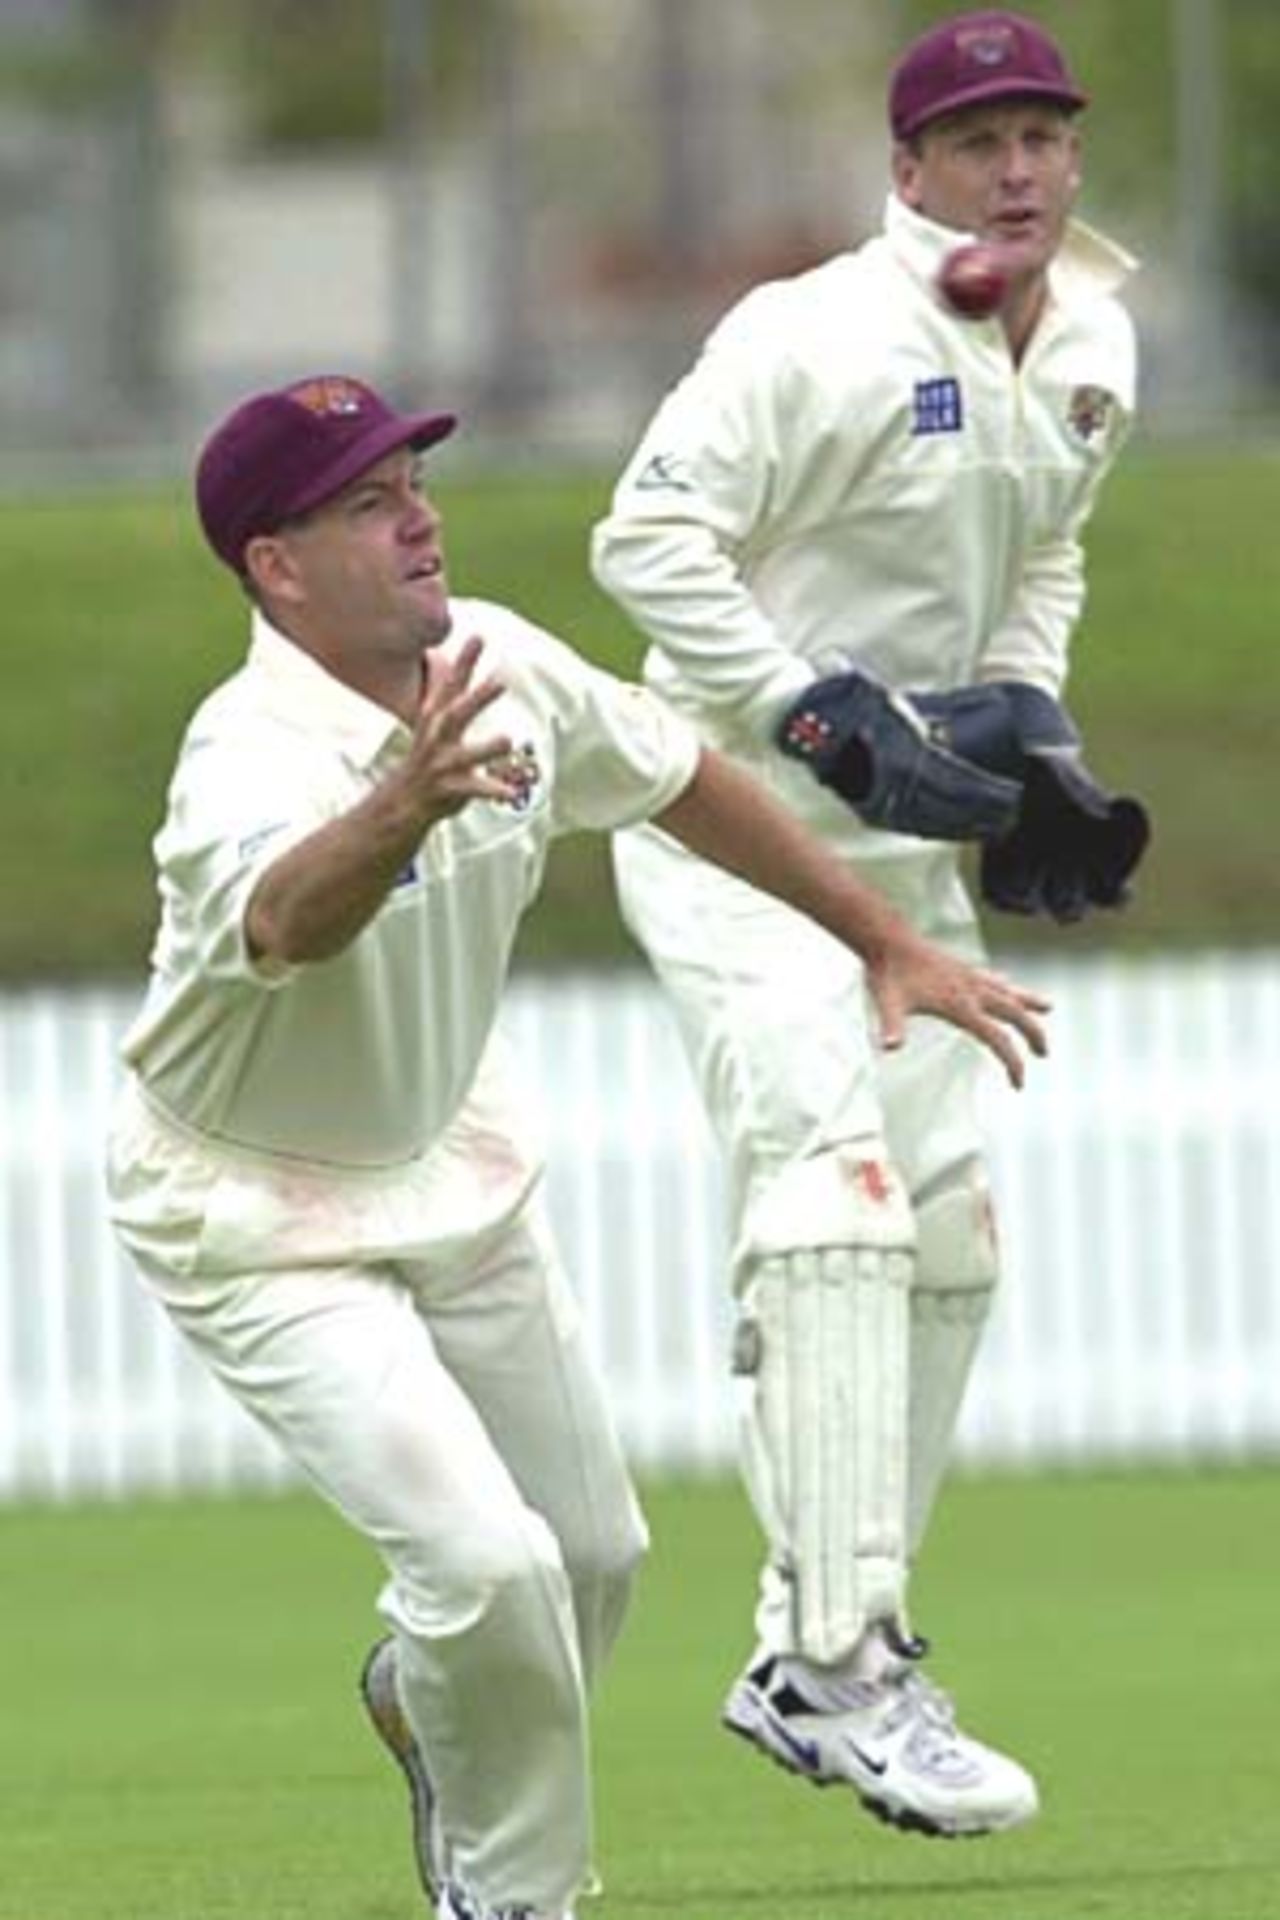 06 Nov 2000: Stuart Law of Queensland dives for a catch while Wade Seccombe looks on against Victoria during the Pura Cup match between Queensland and Victoria played at Allan Border Field in Brisbane, Australia.